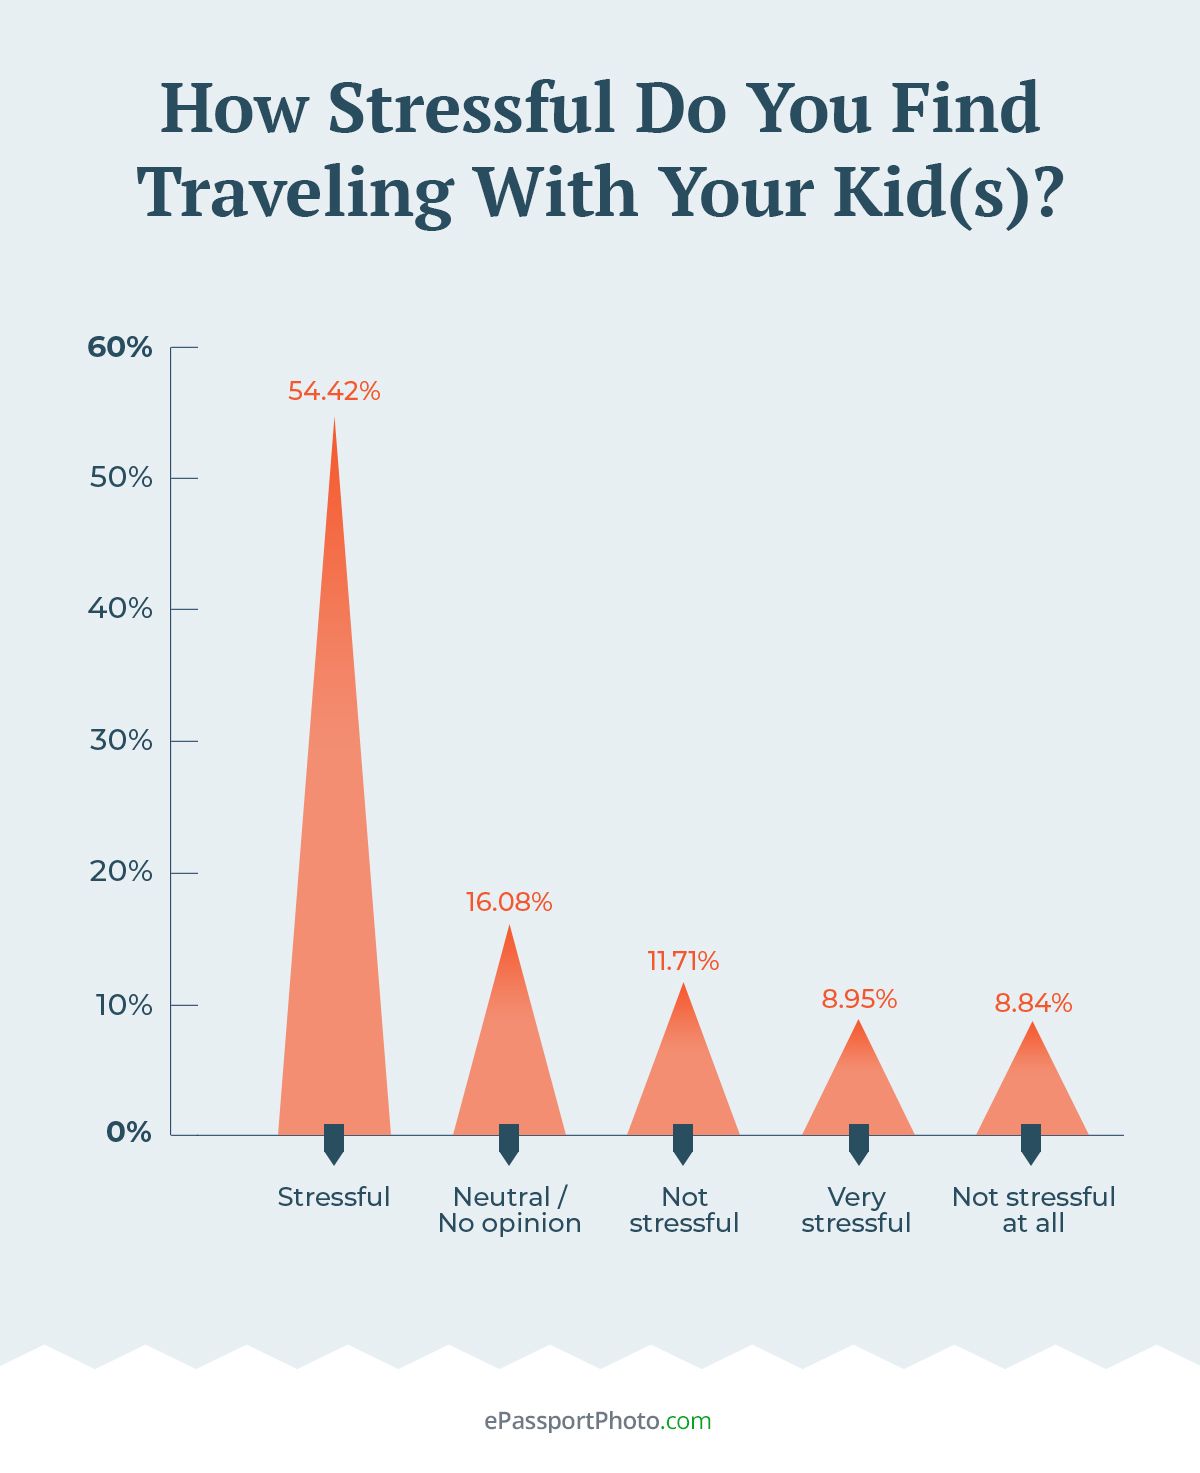 63% of Americans find traveling with their kids stressful or very stressful